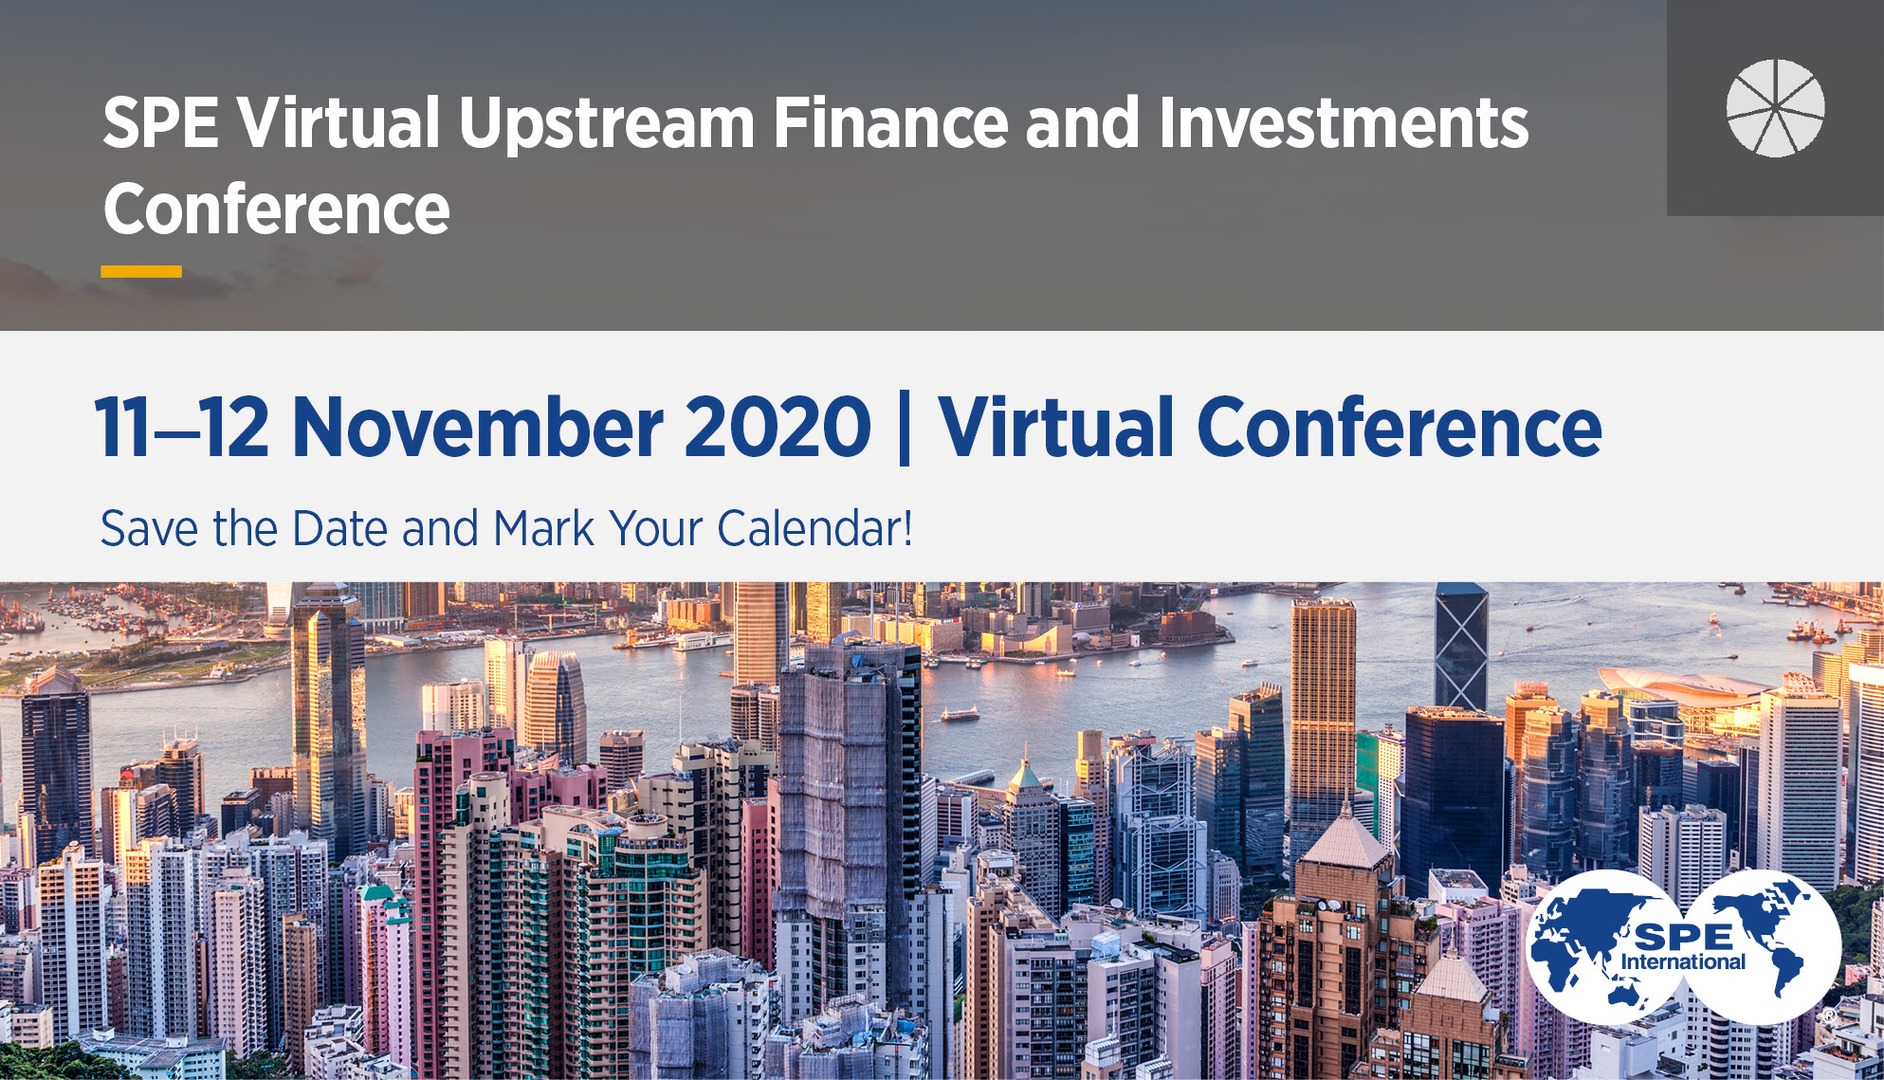 SPE Virtual Upstream Finance and Investments Conference | 11-12 November 2020 | Online Conference, United Kingdom